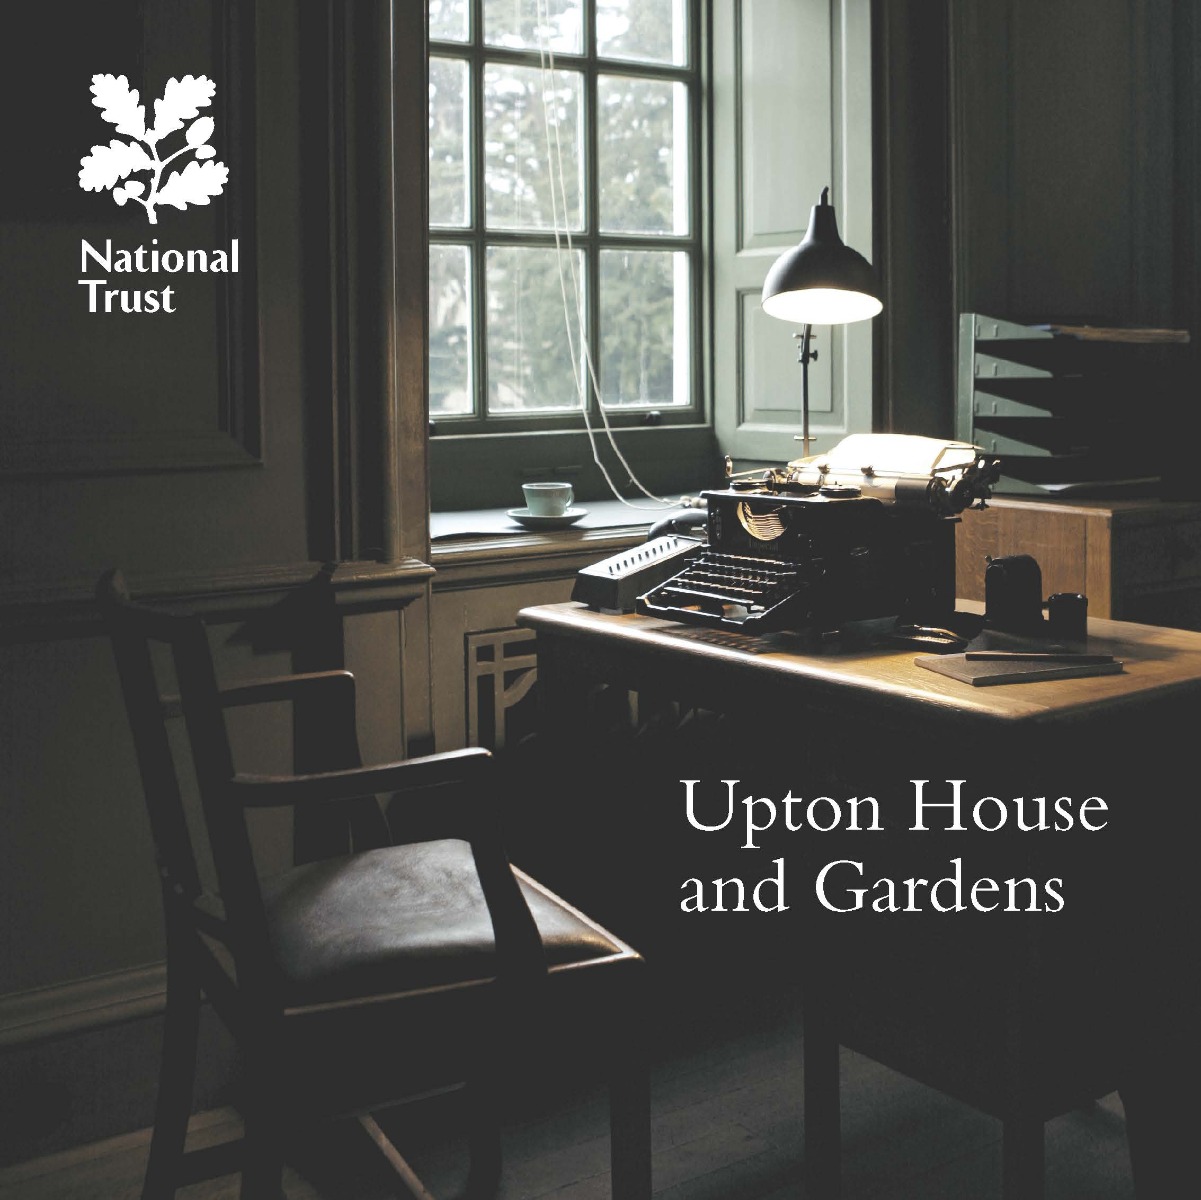 An image of National Trust Upton House Guidebook